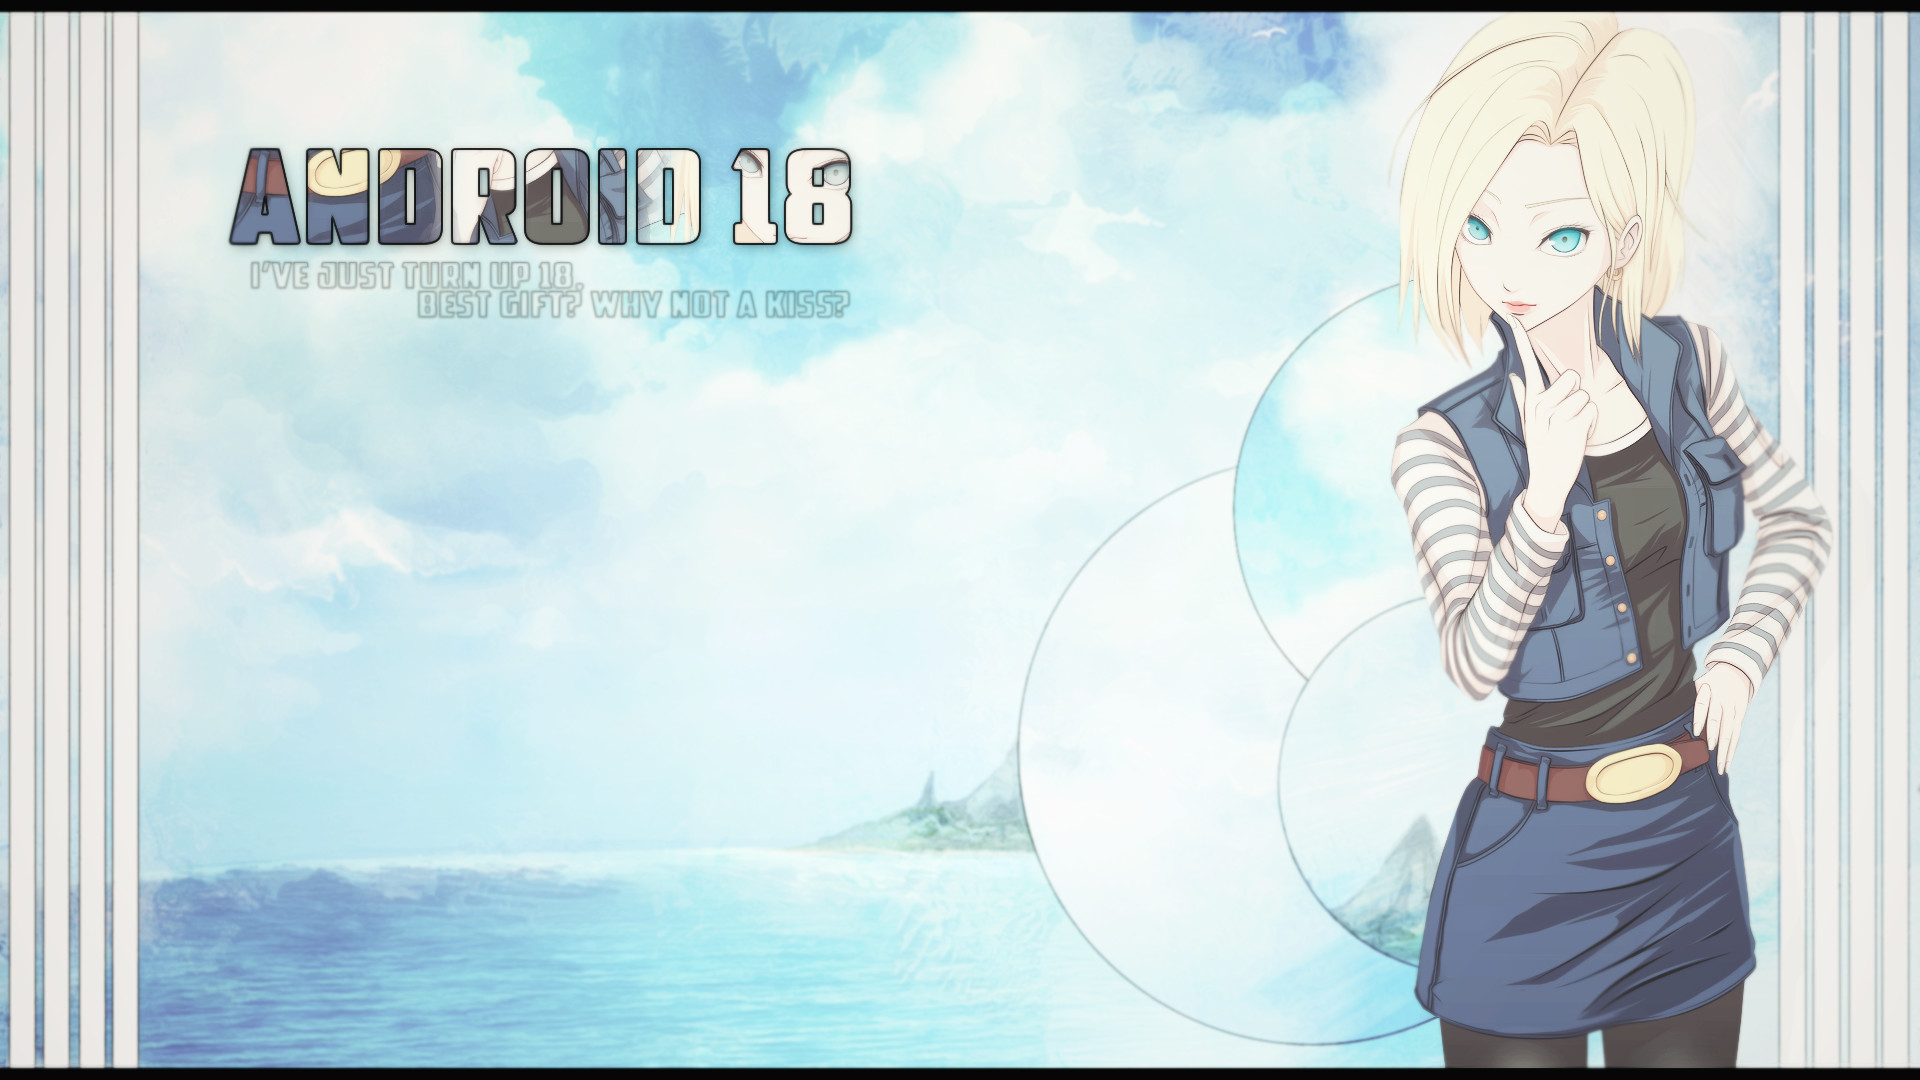 1920x1080 ... Android 18 - My own birthday gift xd by WarCrew